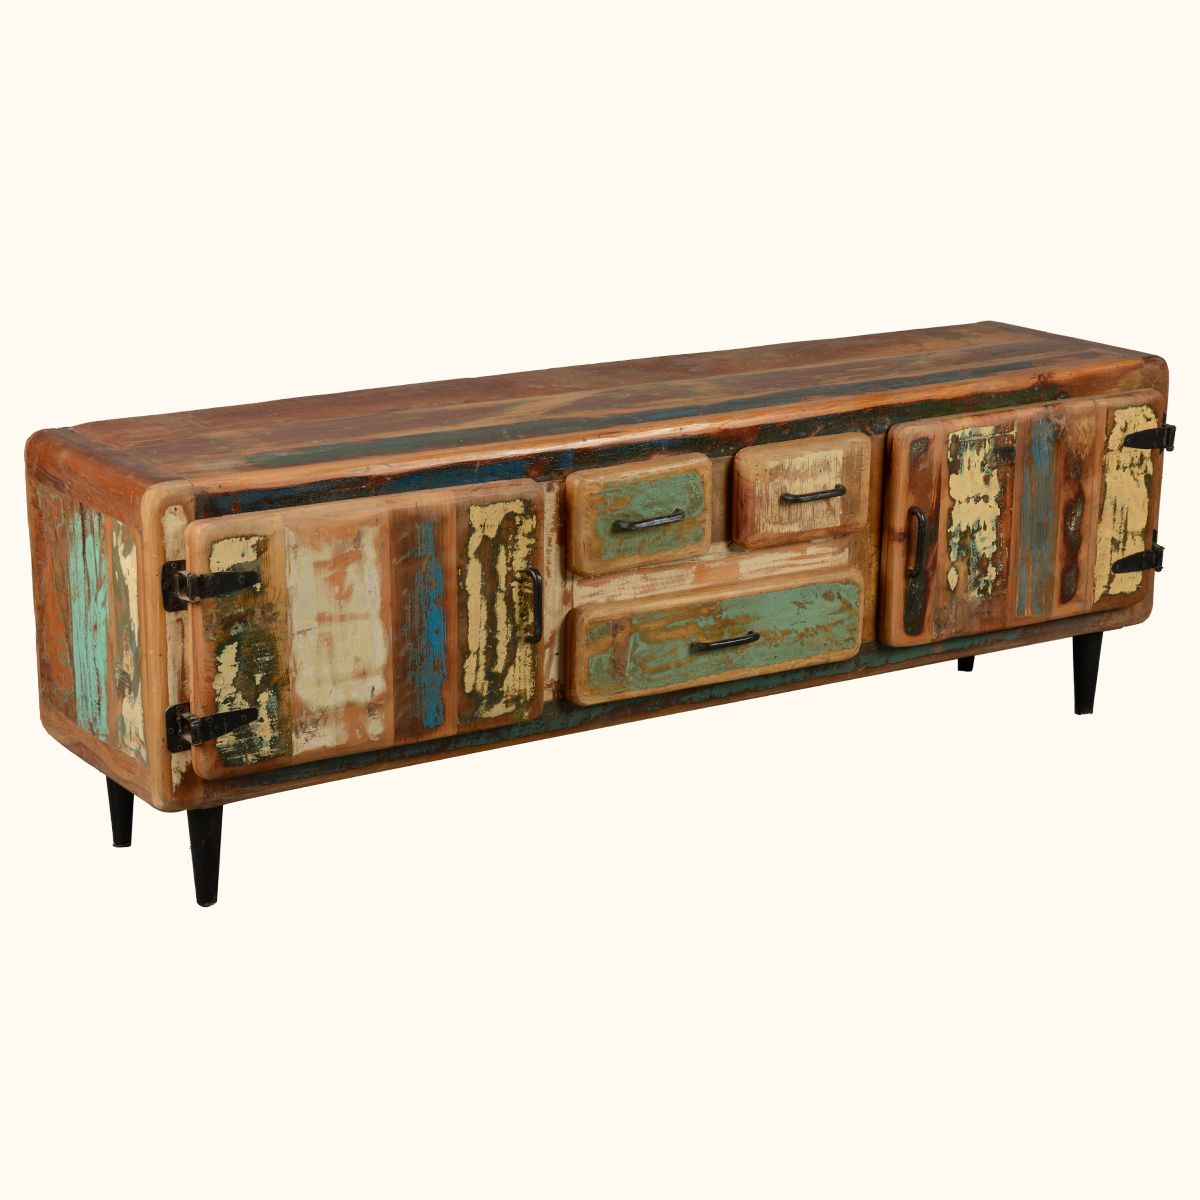 Popular Reclaimed Wood Rustic Media Console Tv Stand Cabinet Entertainment With Regard To Rustic Furniture Tv Stands (View 18 of 20)